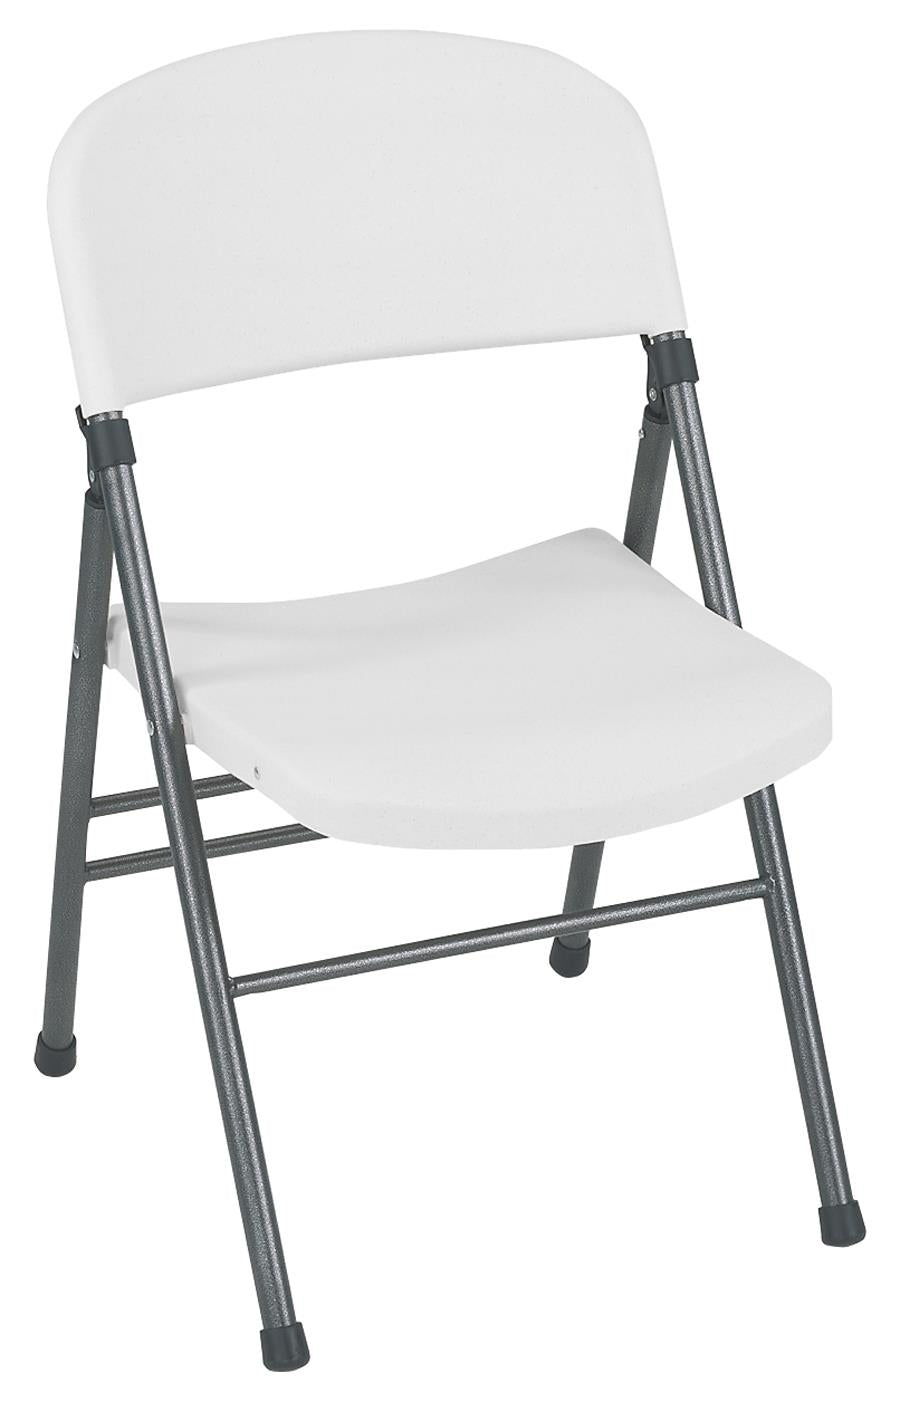 Resin Folding Chair with Molded Seat and Back - White/Speckle Pewter - N/A